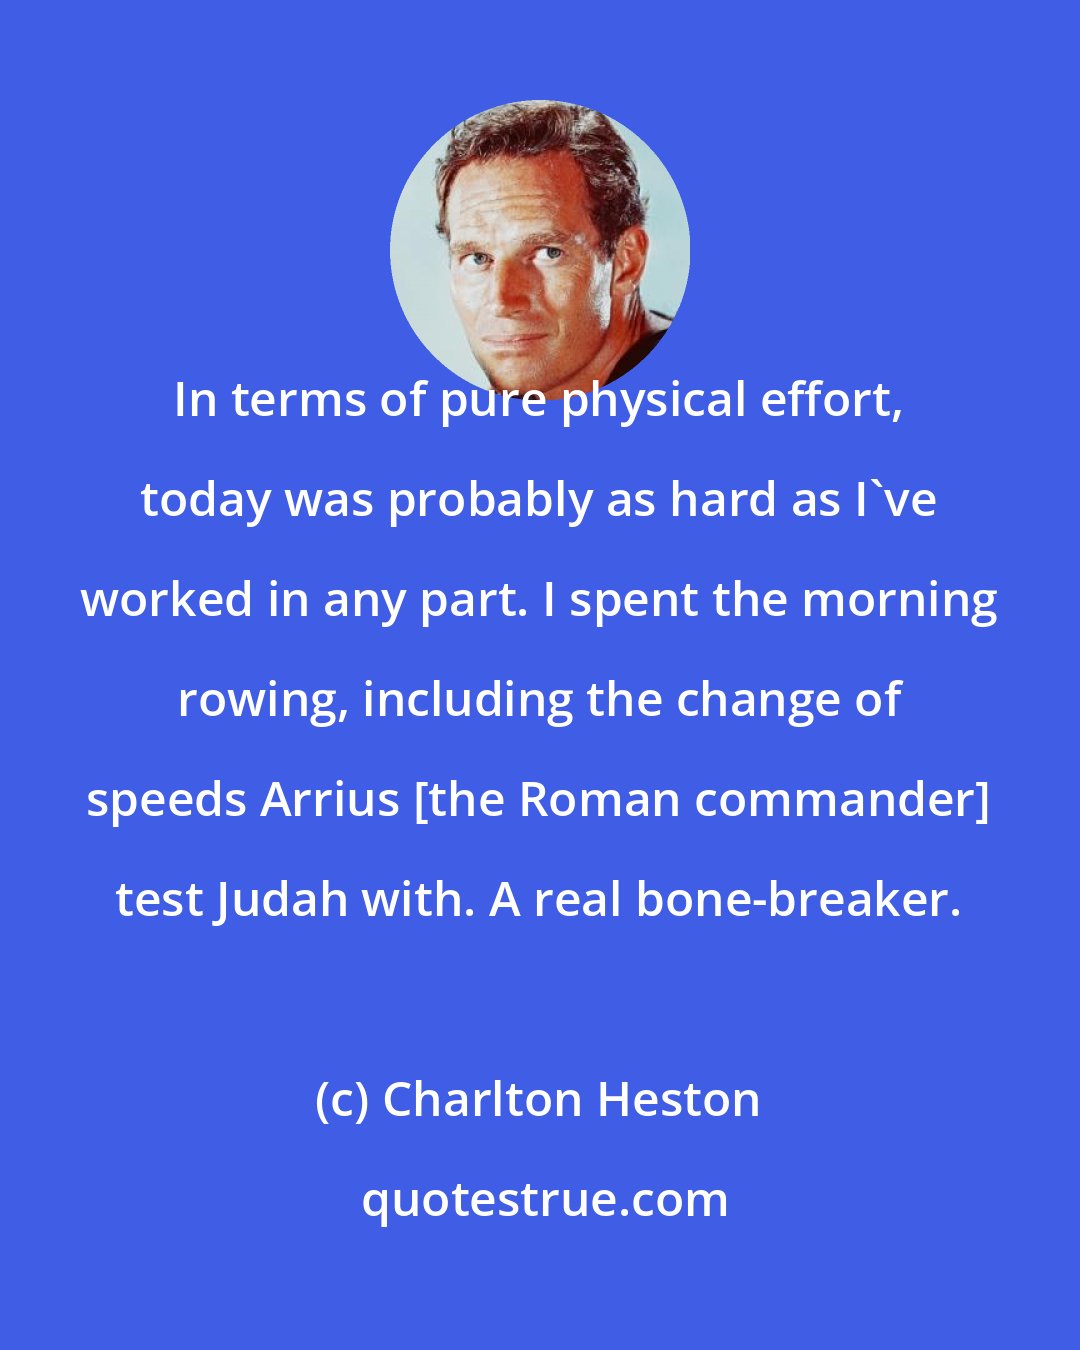 Charlton Heston: In terms of pure physical effort, today was probably as hard as I've worked in any part. I spent the morning rowing, including the change of speeds Arrius [the Roman commander] test Judah with. A real bone-breaker.